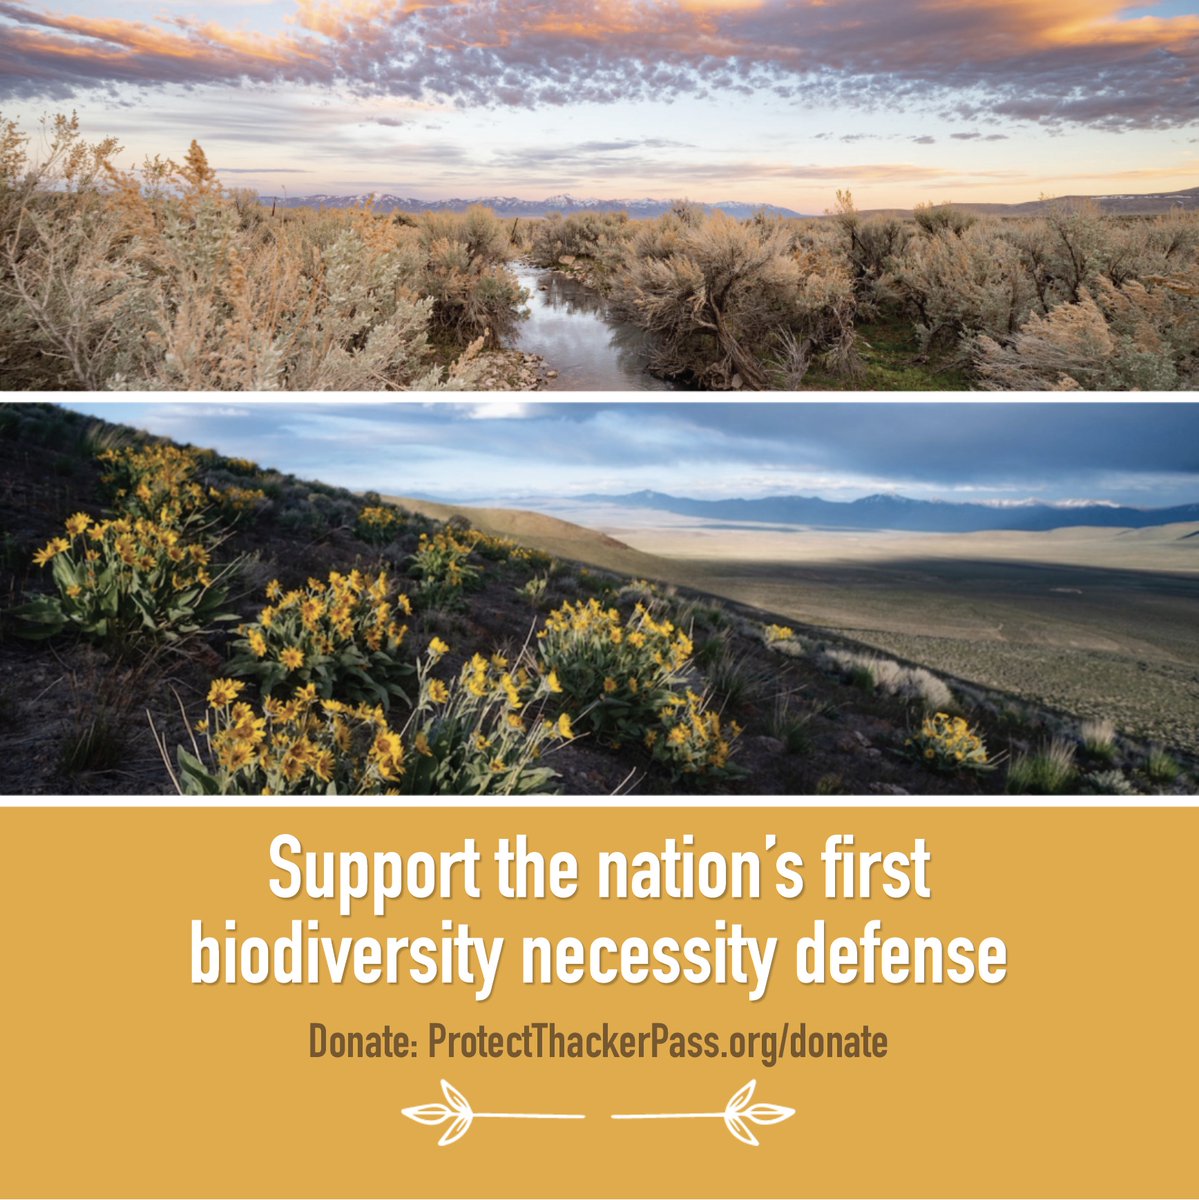 We are fundraising to support the nation's first biodiversity necessity defense. We are being sued by a large mining company for working to defend the land at Thacker Pass. Please donate if you can. Thank you supporters! protectthackerpass.org/donate/ #BiodiversityCrisis